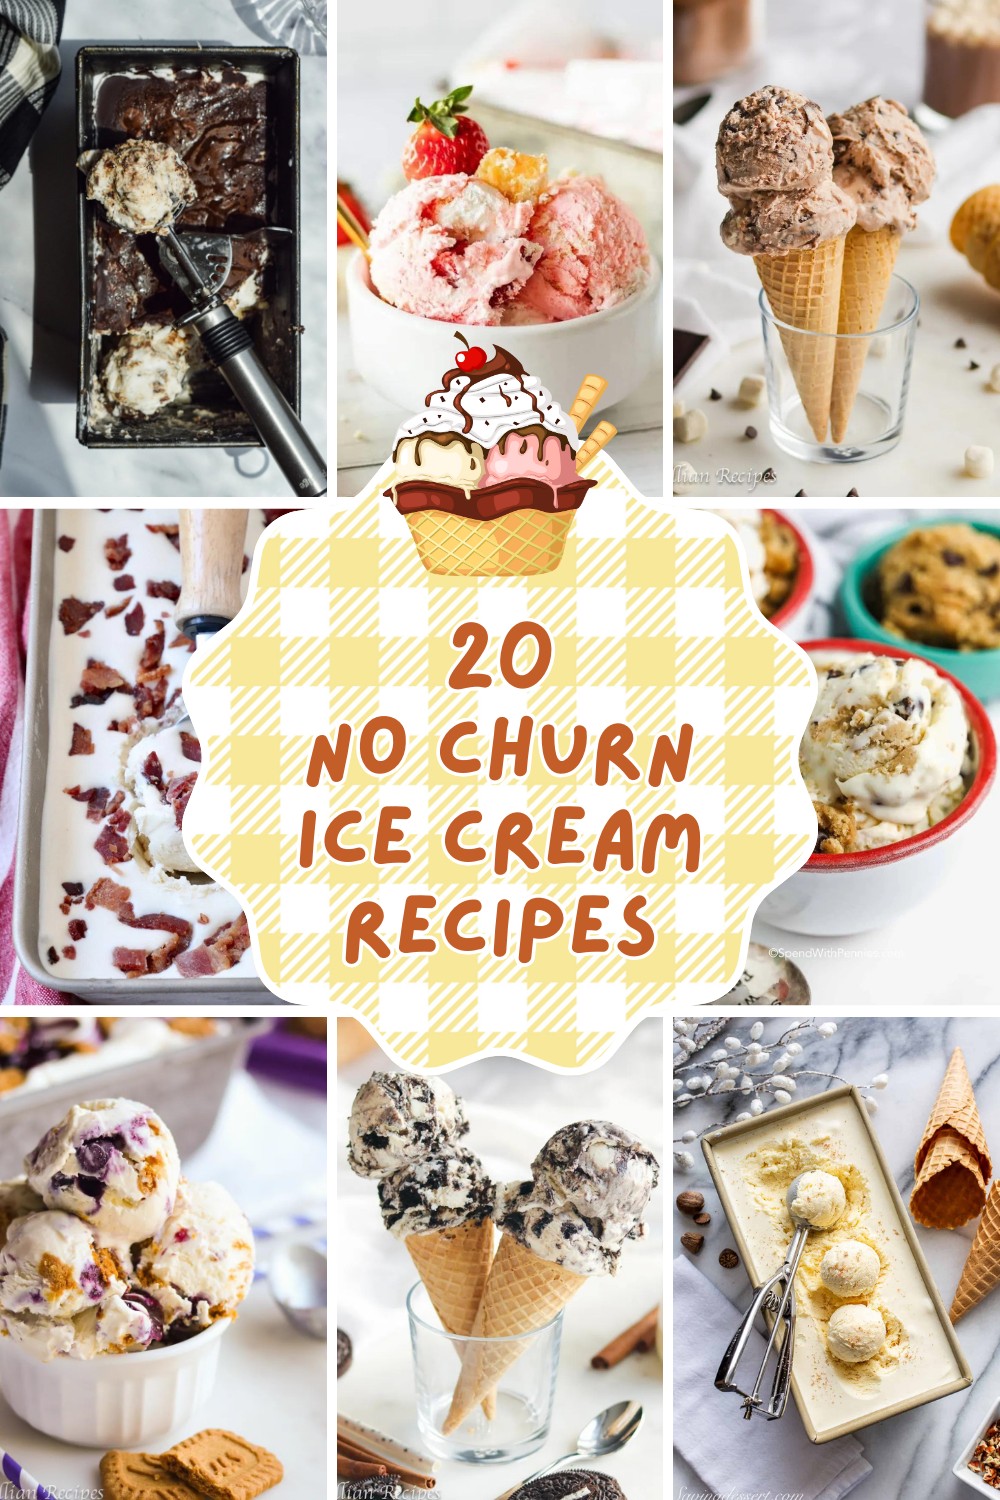 Dive into a world of frozen delights with our collection of delicious no-churn ice cream recipes! From classic flavors to unique twists, these easy-to-make treats are perfect for cooling down and satisfying your sweet tooth. 🍨❄️ #NoChurnIceCream #FrozenTreats